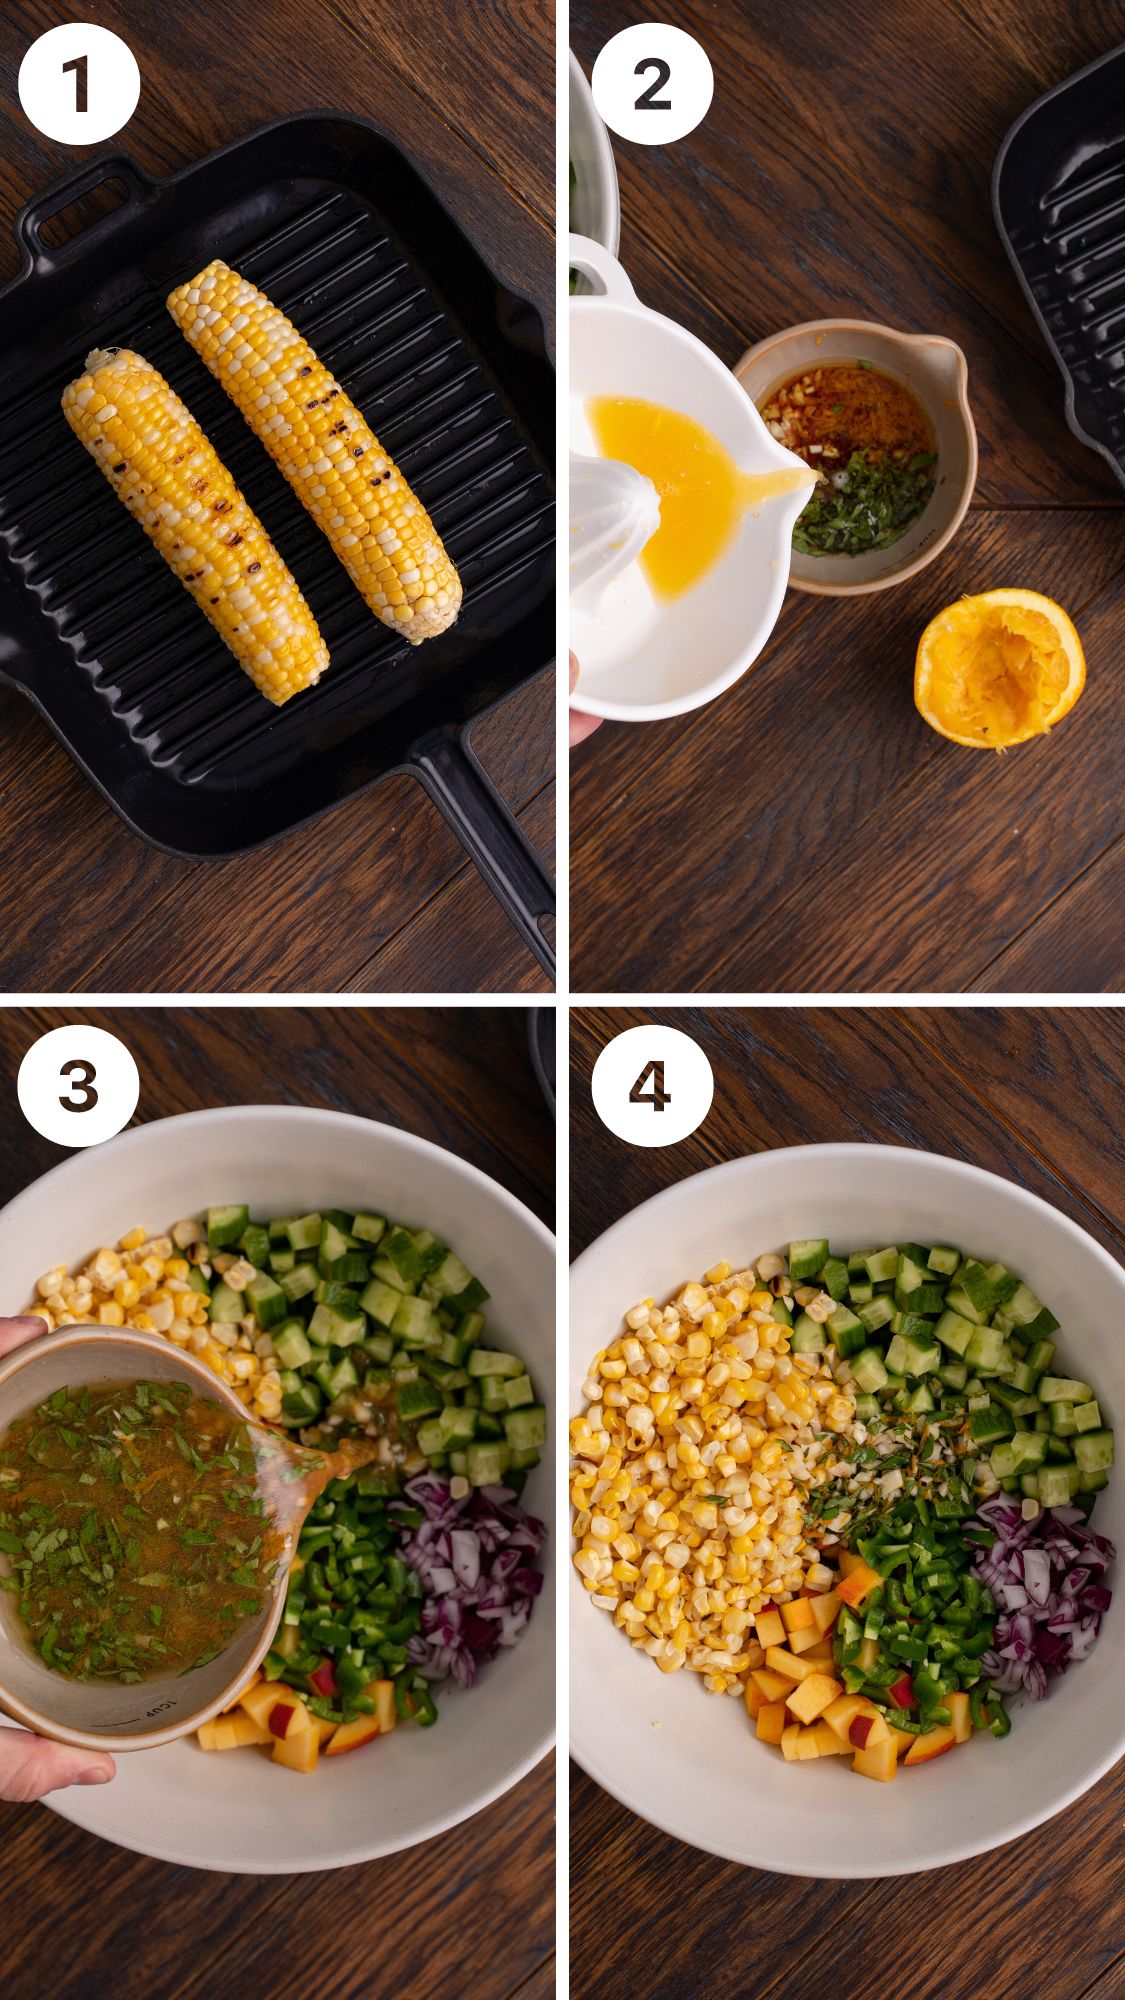 Step-by-step process for making corn salad: 1. Grilled corn on a pan. 2. Juicing an orange with other ingredients. 3. Preparing dressing with herbs. 4. Mixing chopped vegetables and corn in a bowl.